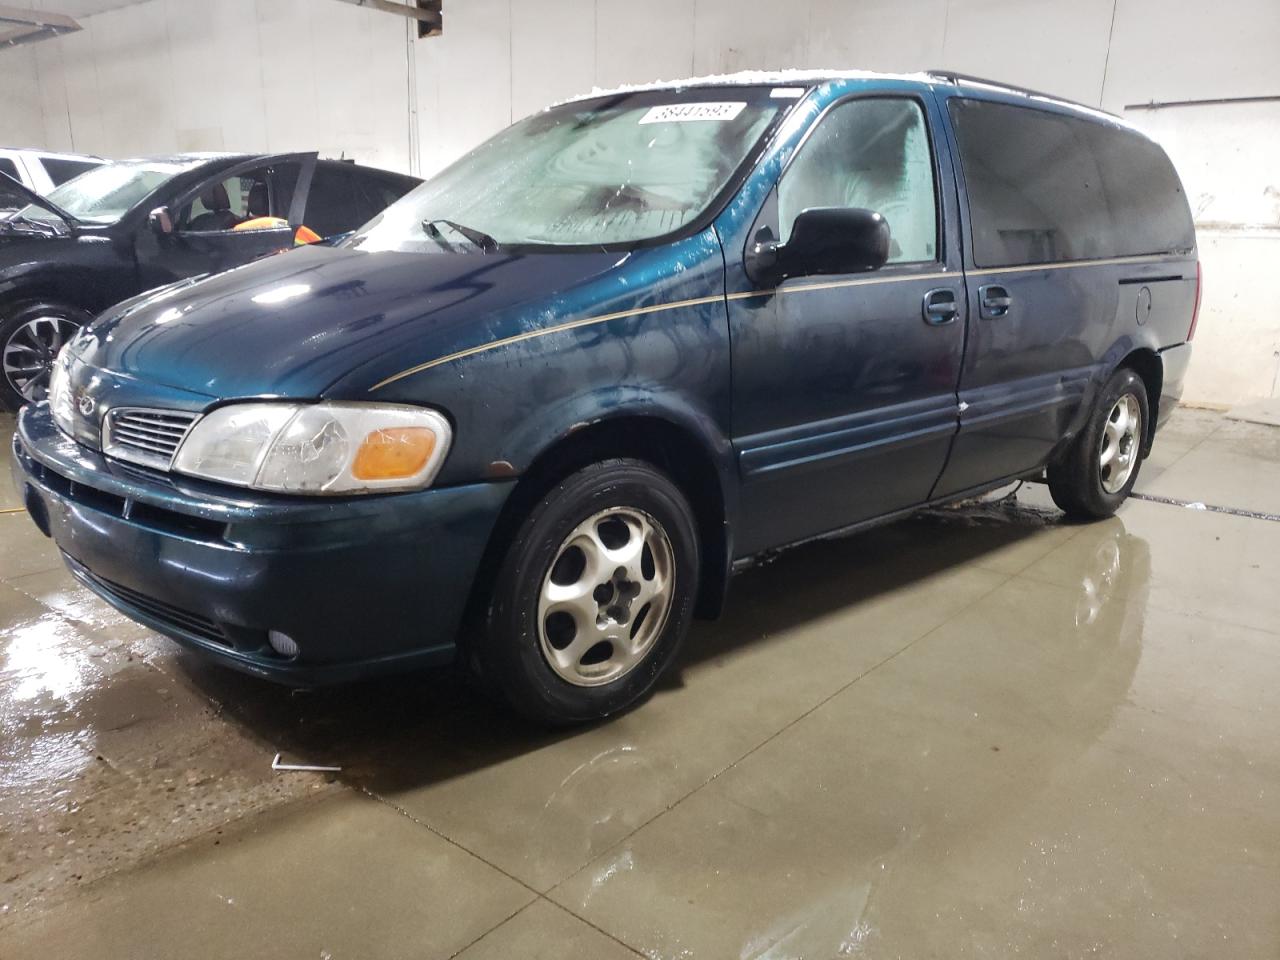 2001 Oldsmobile Silhouette for sale at Copart Portland, MI Lot #38441*** |  SalvageReseller.com